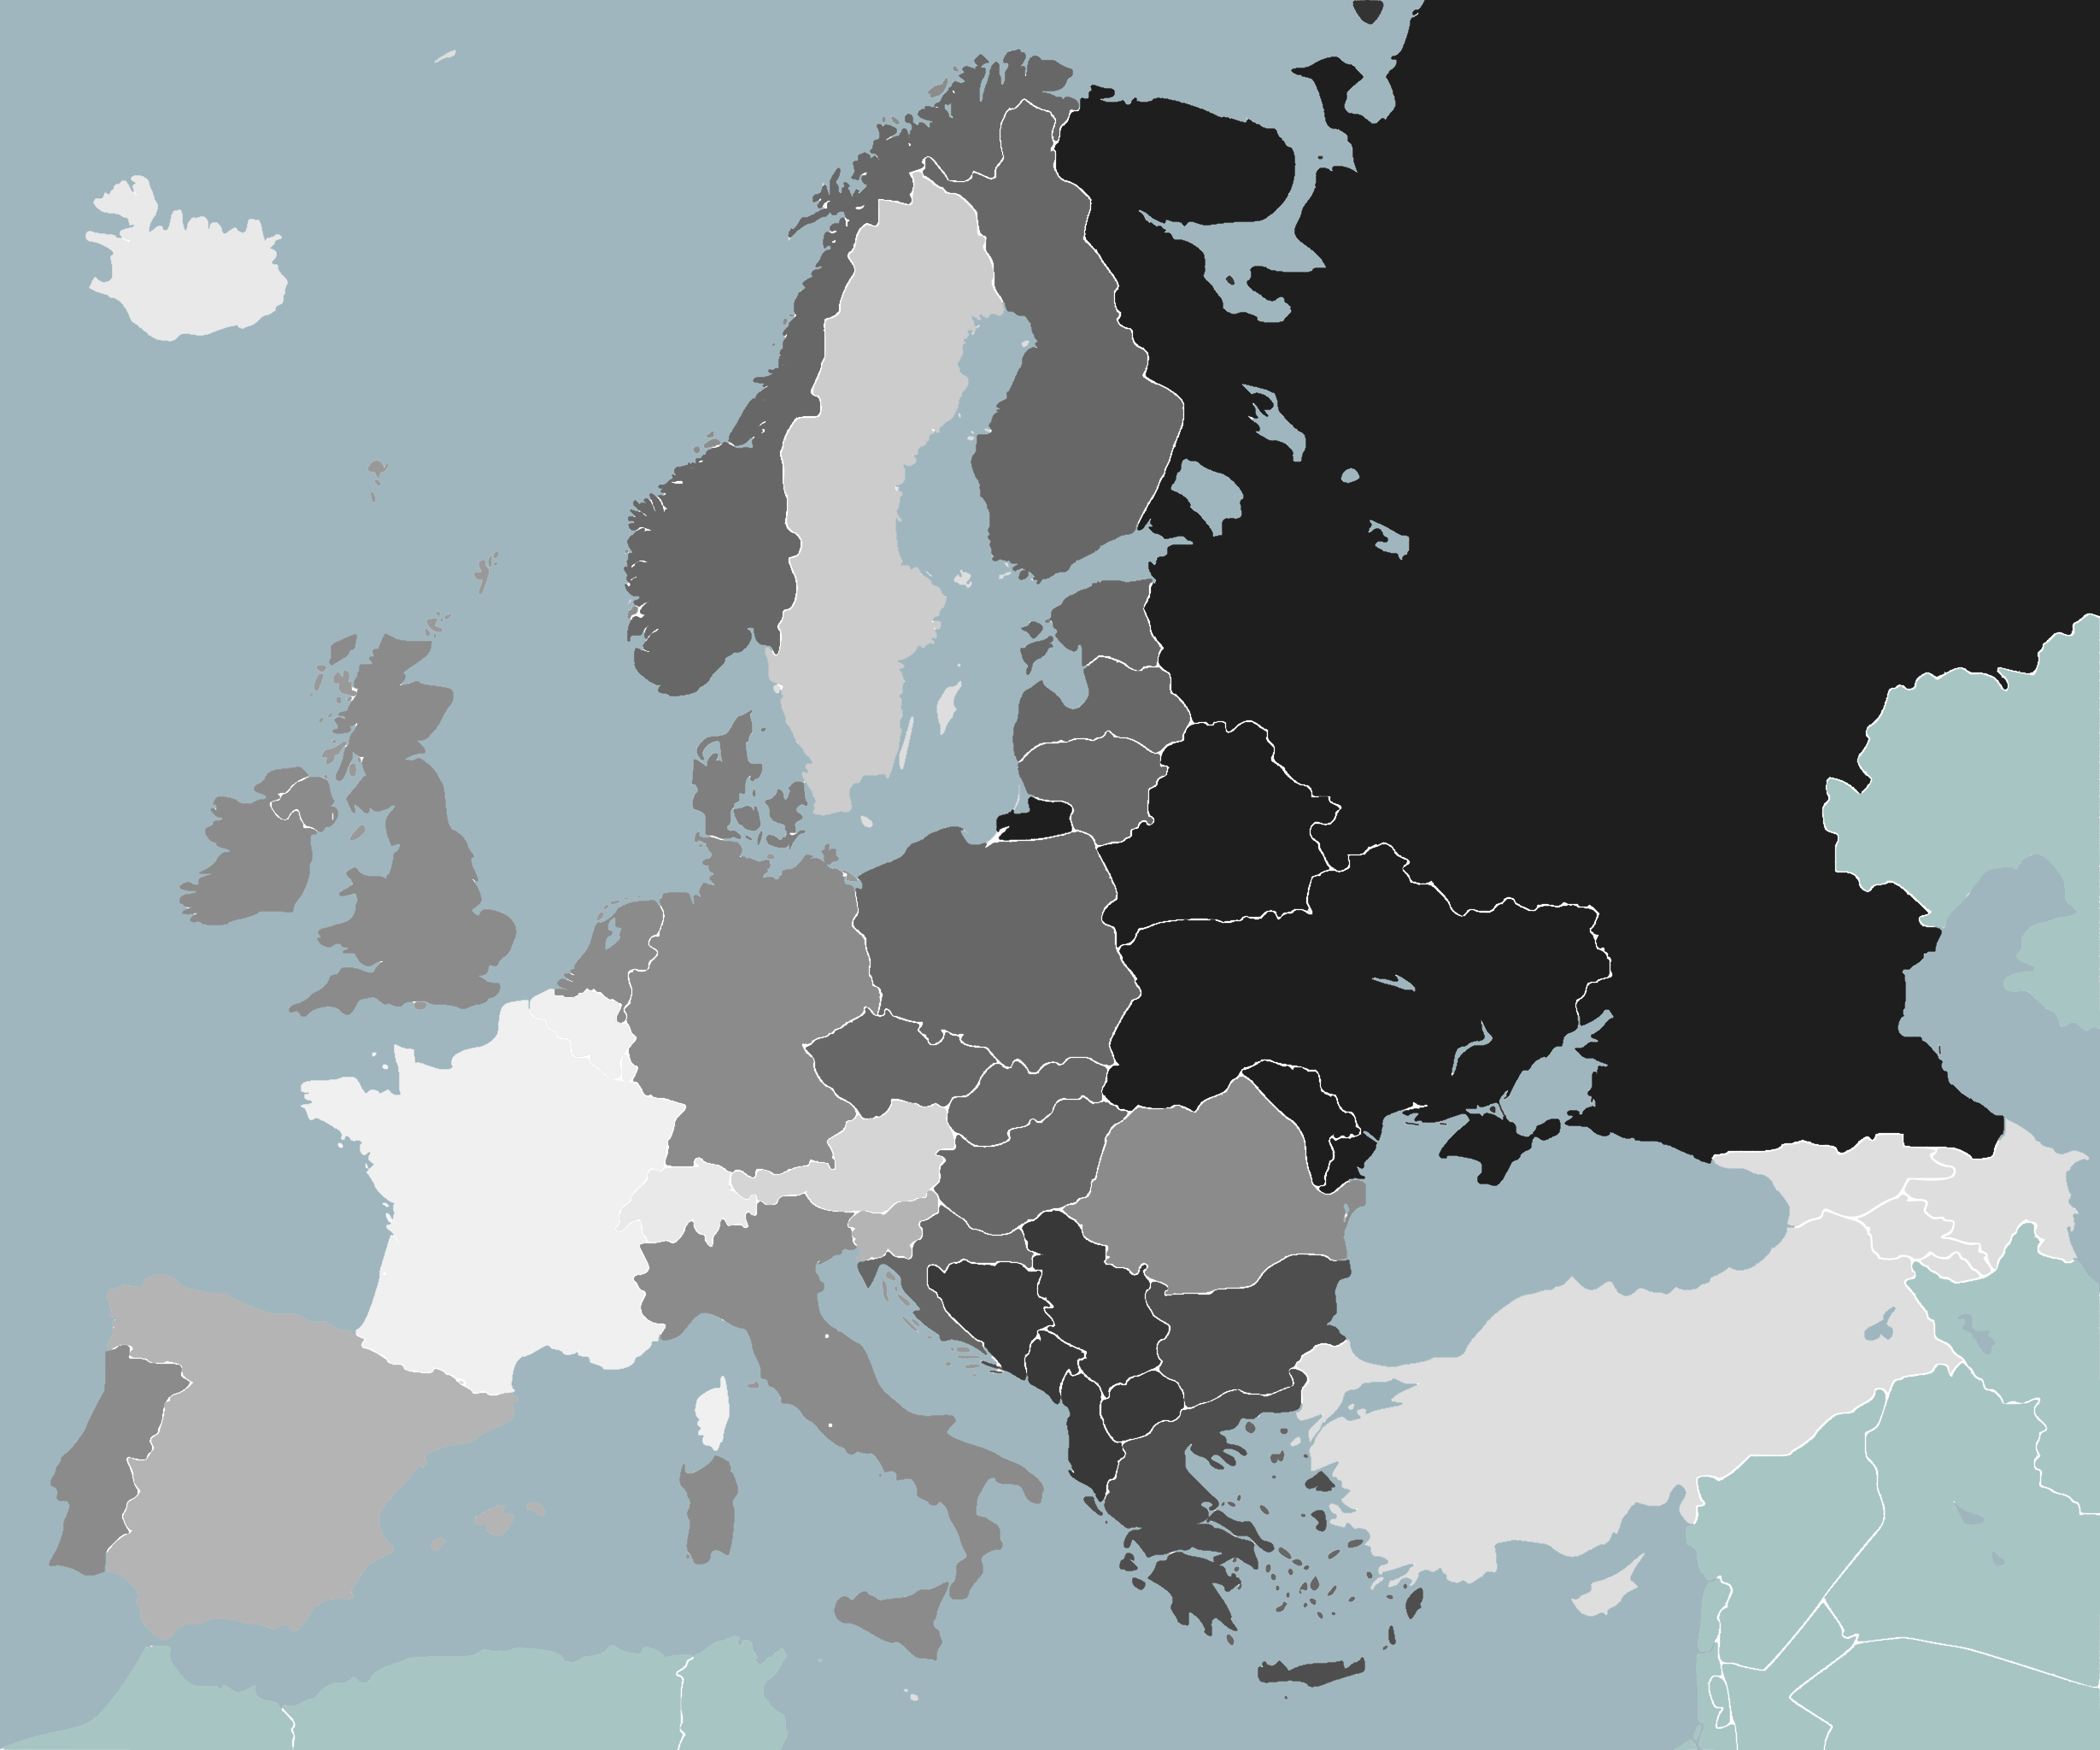 Labelled map of European countries color coded by percent of Avaaz members